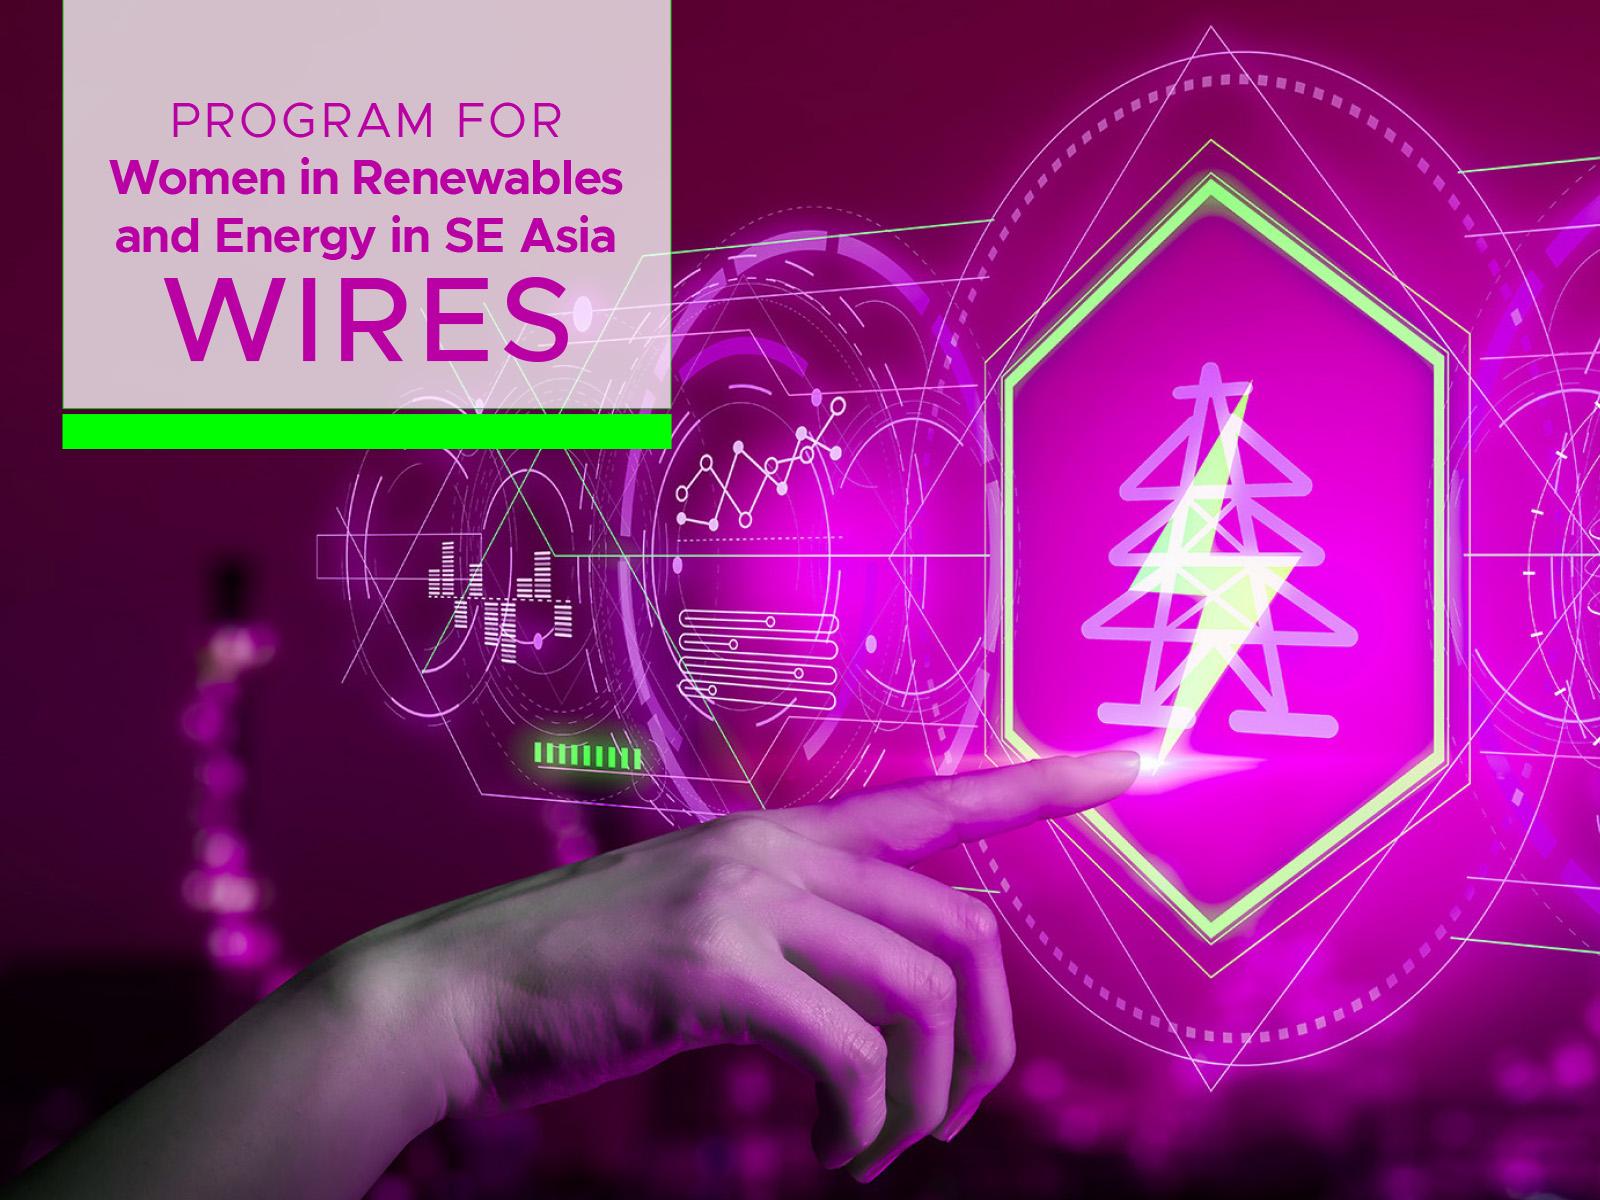 Text: "Program for Women in Renewables and Energy in SE Asia (WIRES)" superimposed over an image of a hand touching a button with a symbol for lightning on it.